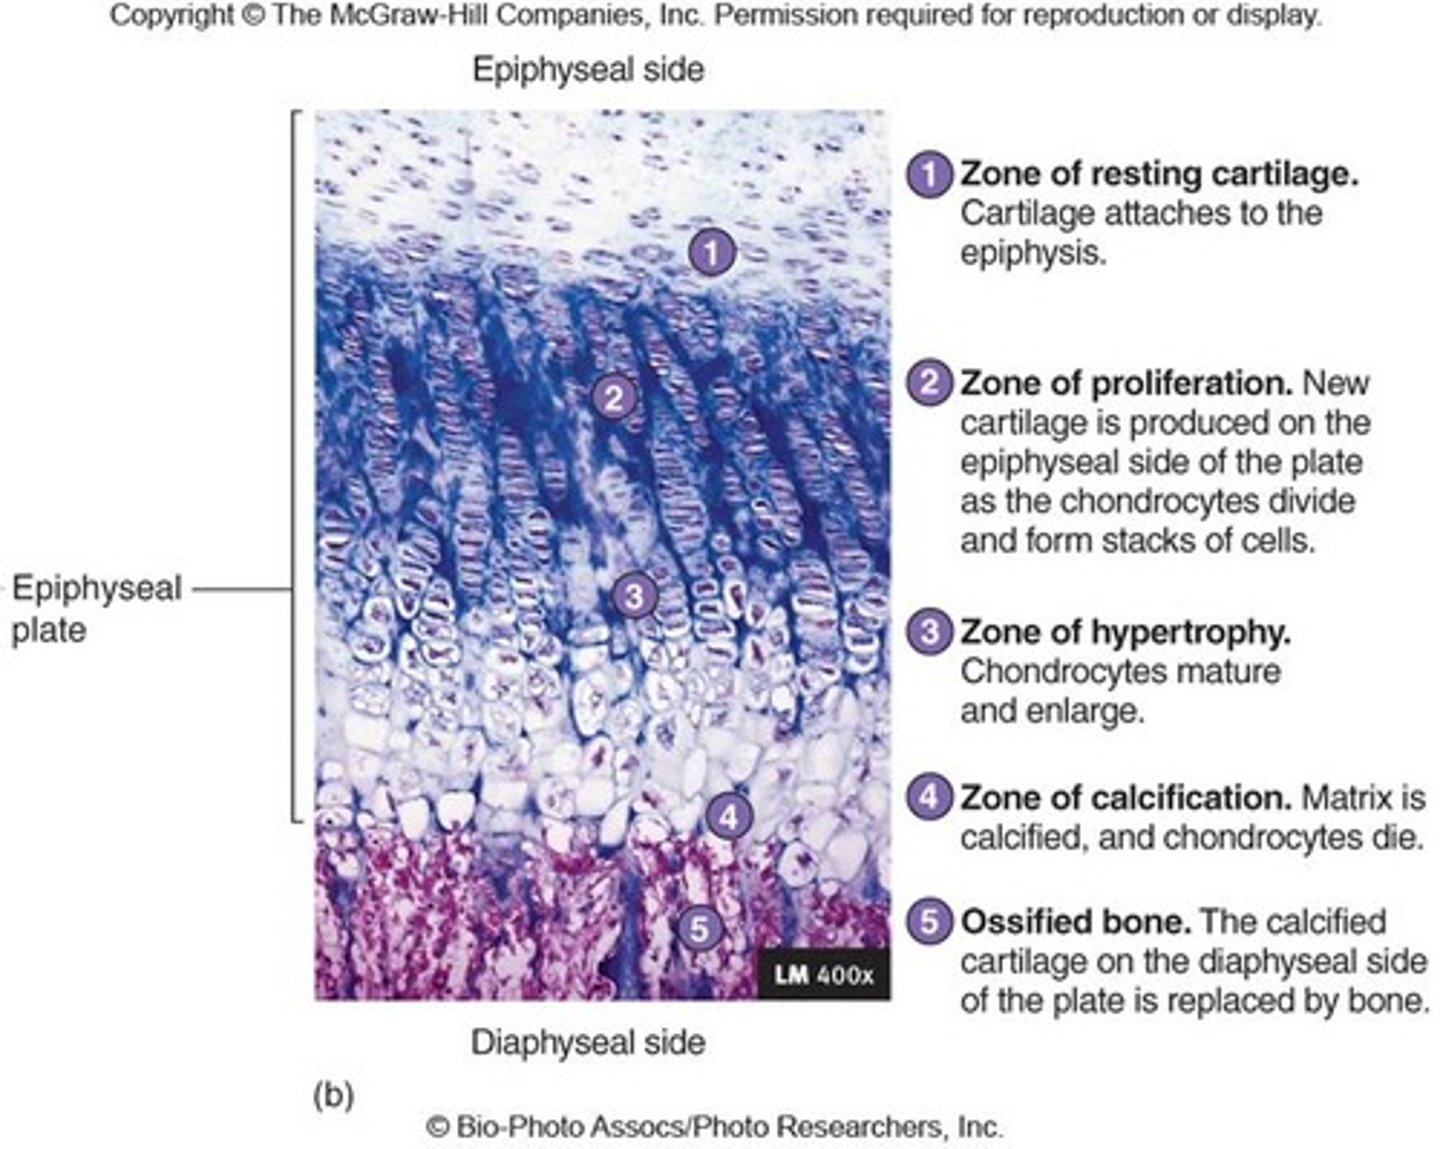 <p>- rows of young cells undergoing mitosis; rapid cell division</p><p>- cartilaginous plate thickens as new cells grow and ECM forms</p>